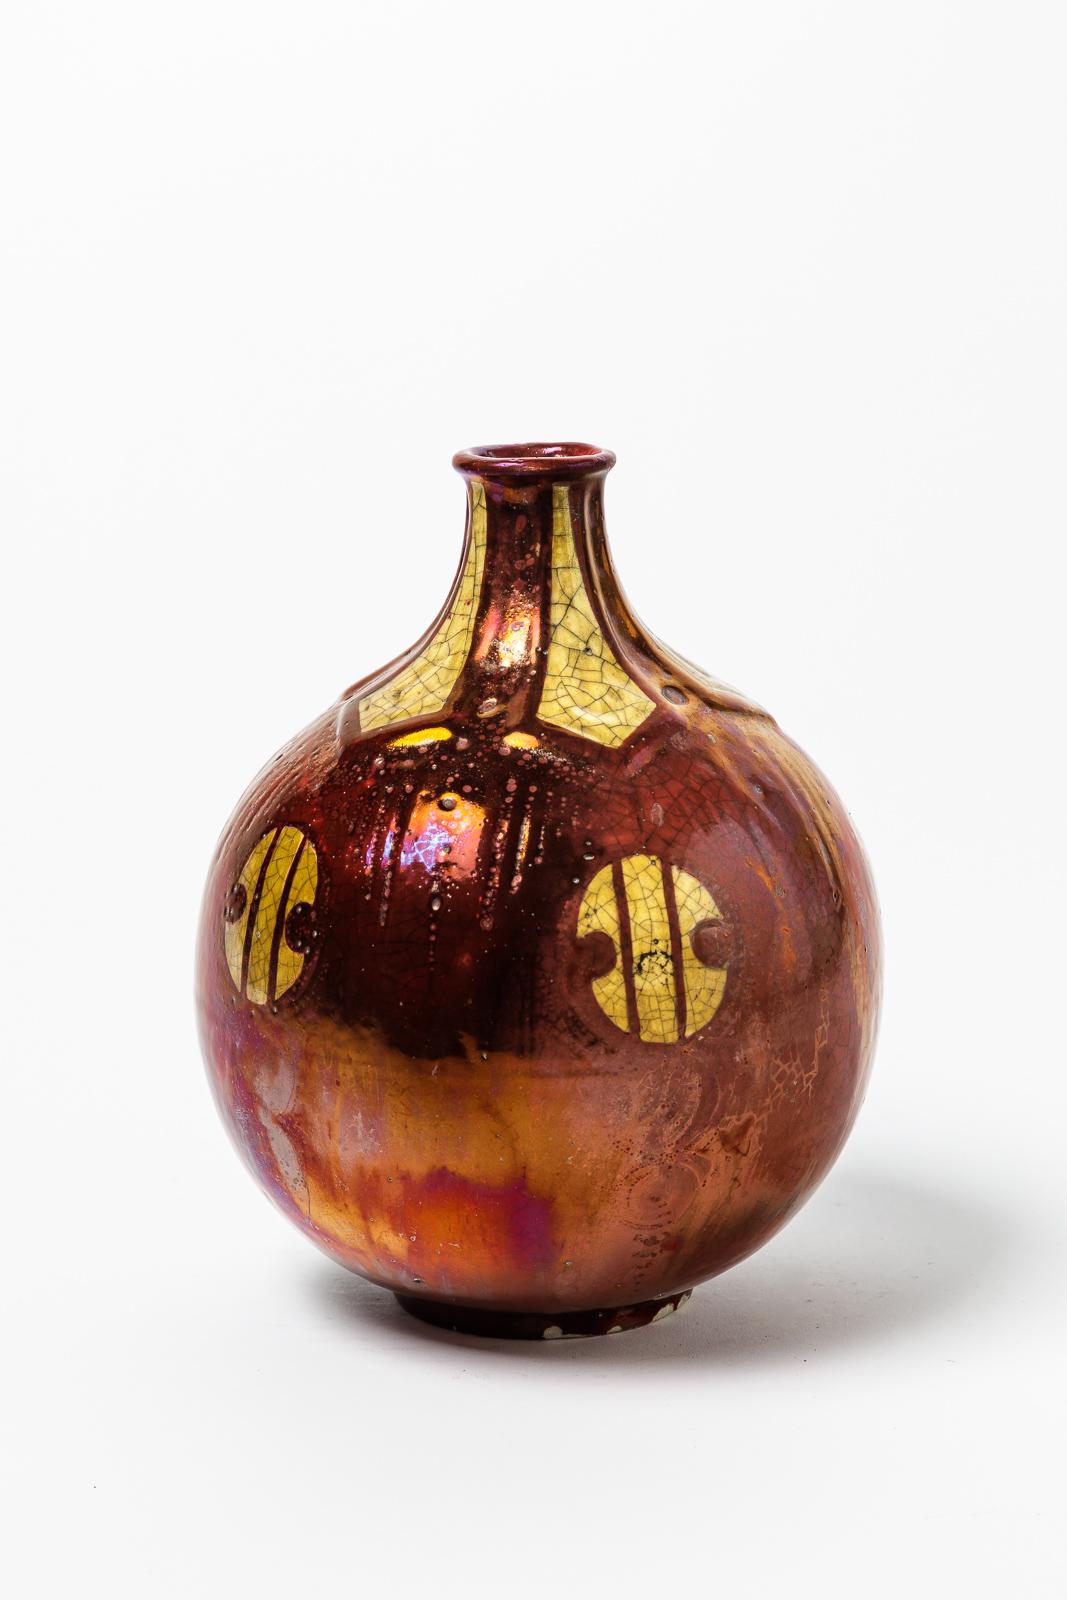 Precious Art Deco 1930 Red and Yellow Ceramic Vase by Emile and Bruneau Balon In Good Condition For Sale In Neuilly-en- sancerre, FR